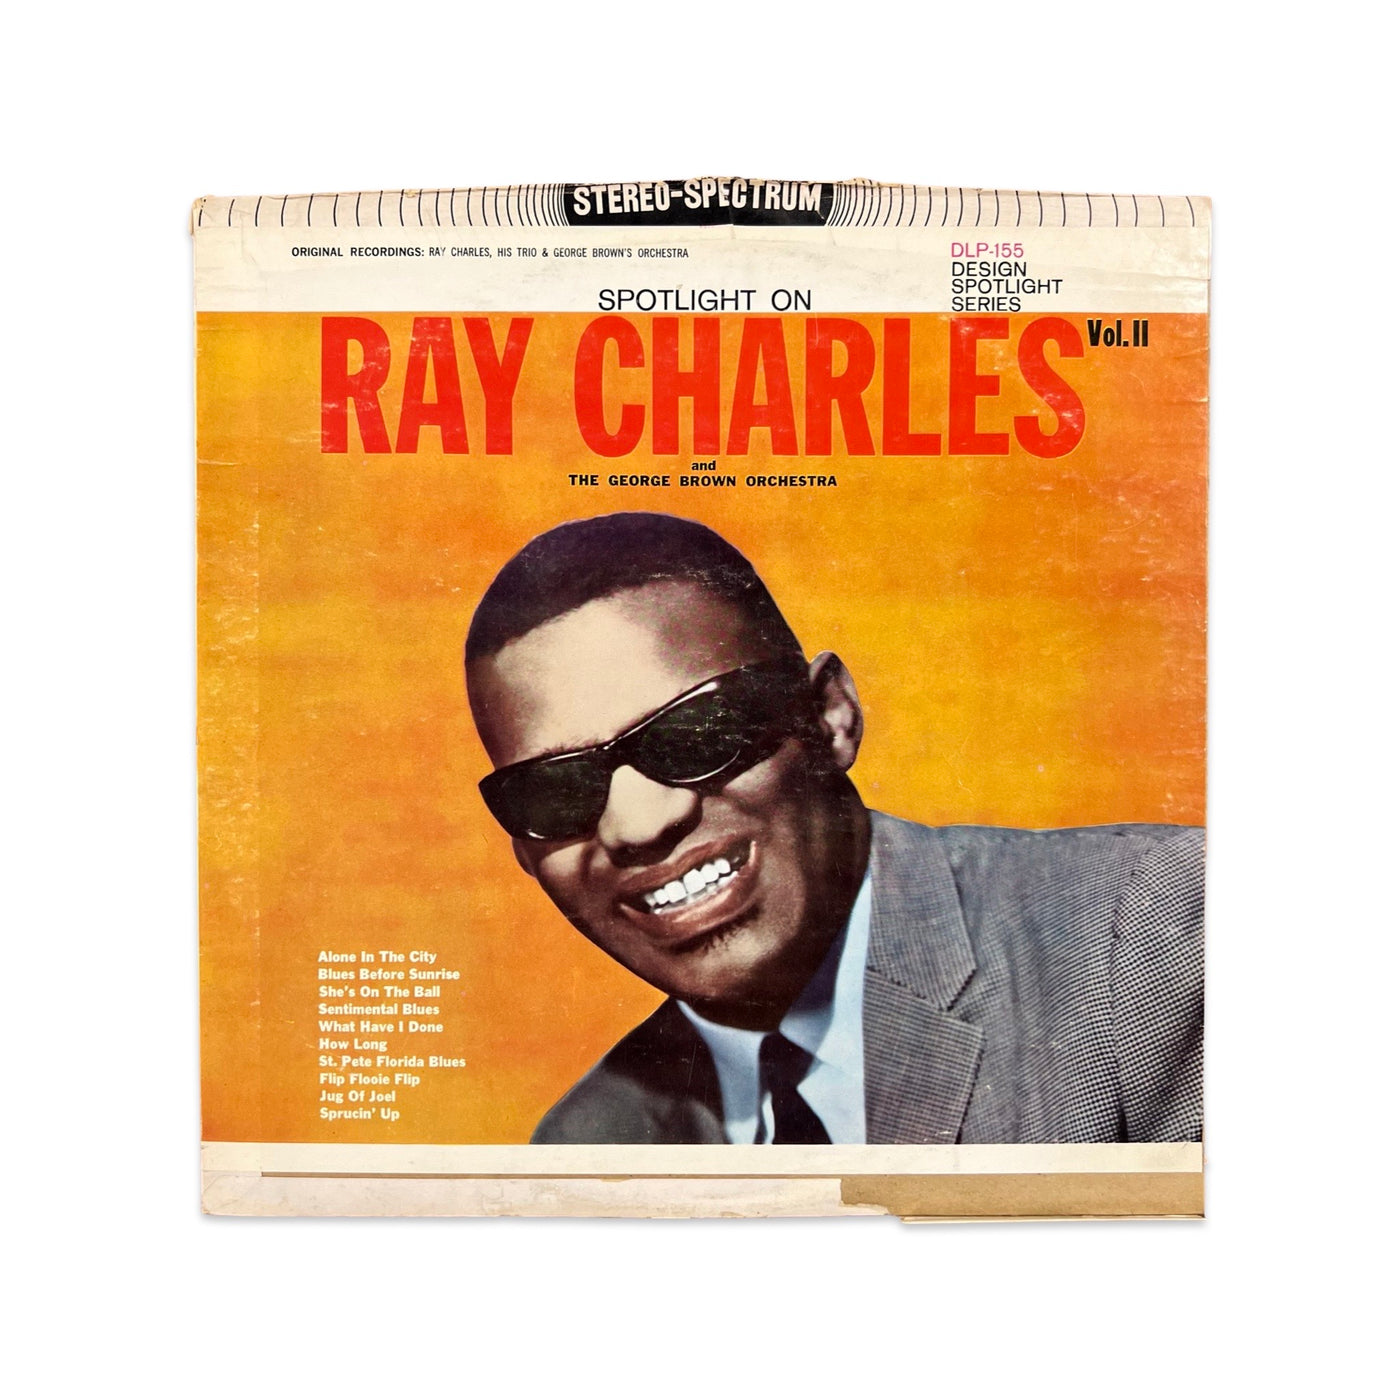 Ray Charles And The George Brown Orchestra - Spotlight On Ray Charles Vol. II